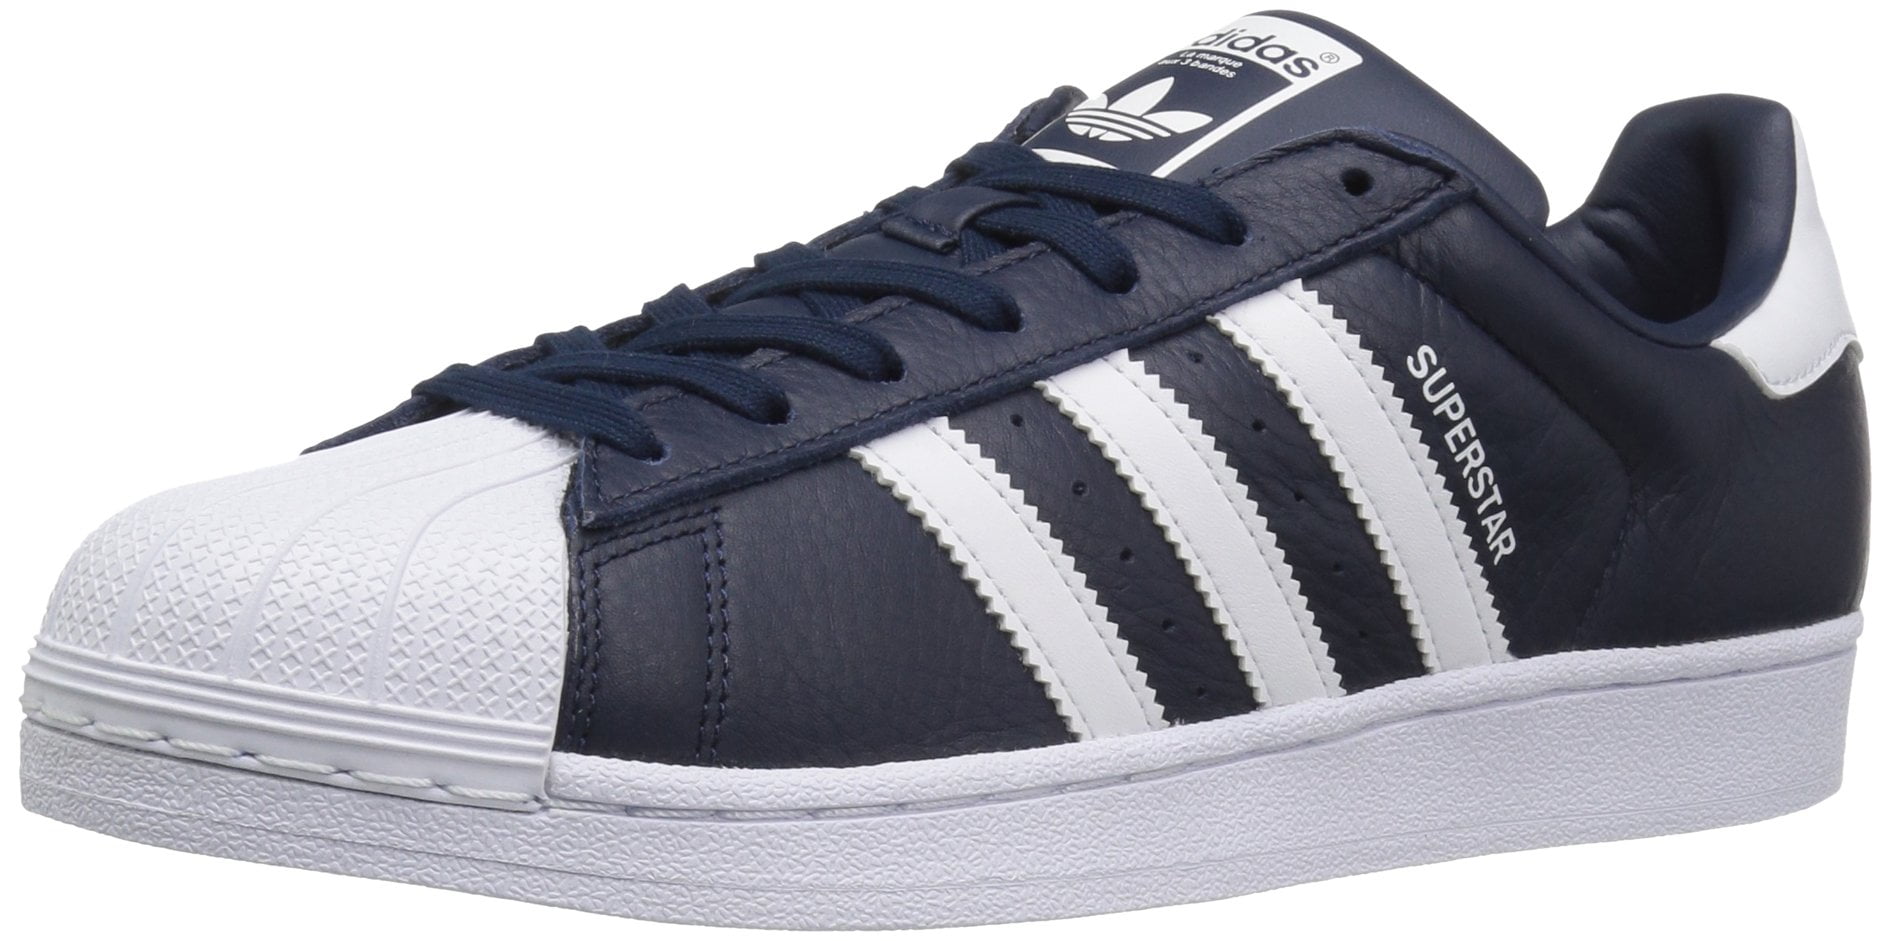 Adidas Superstar Sneakers Navy White 